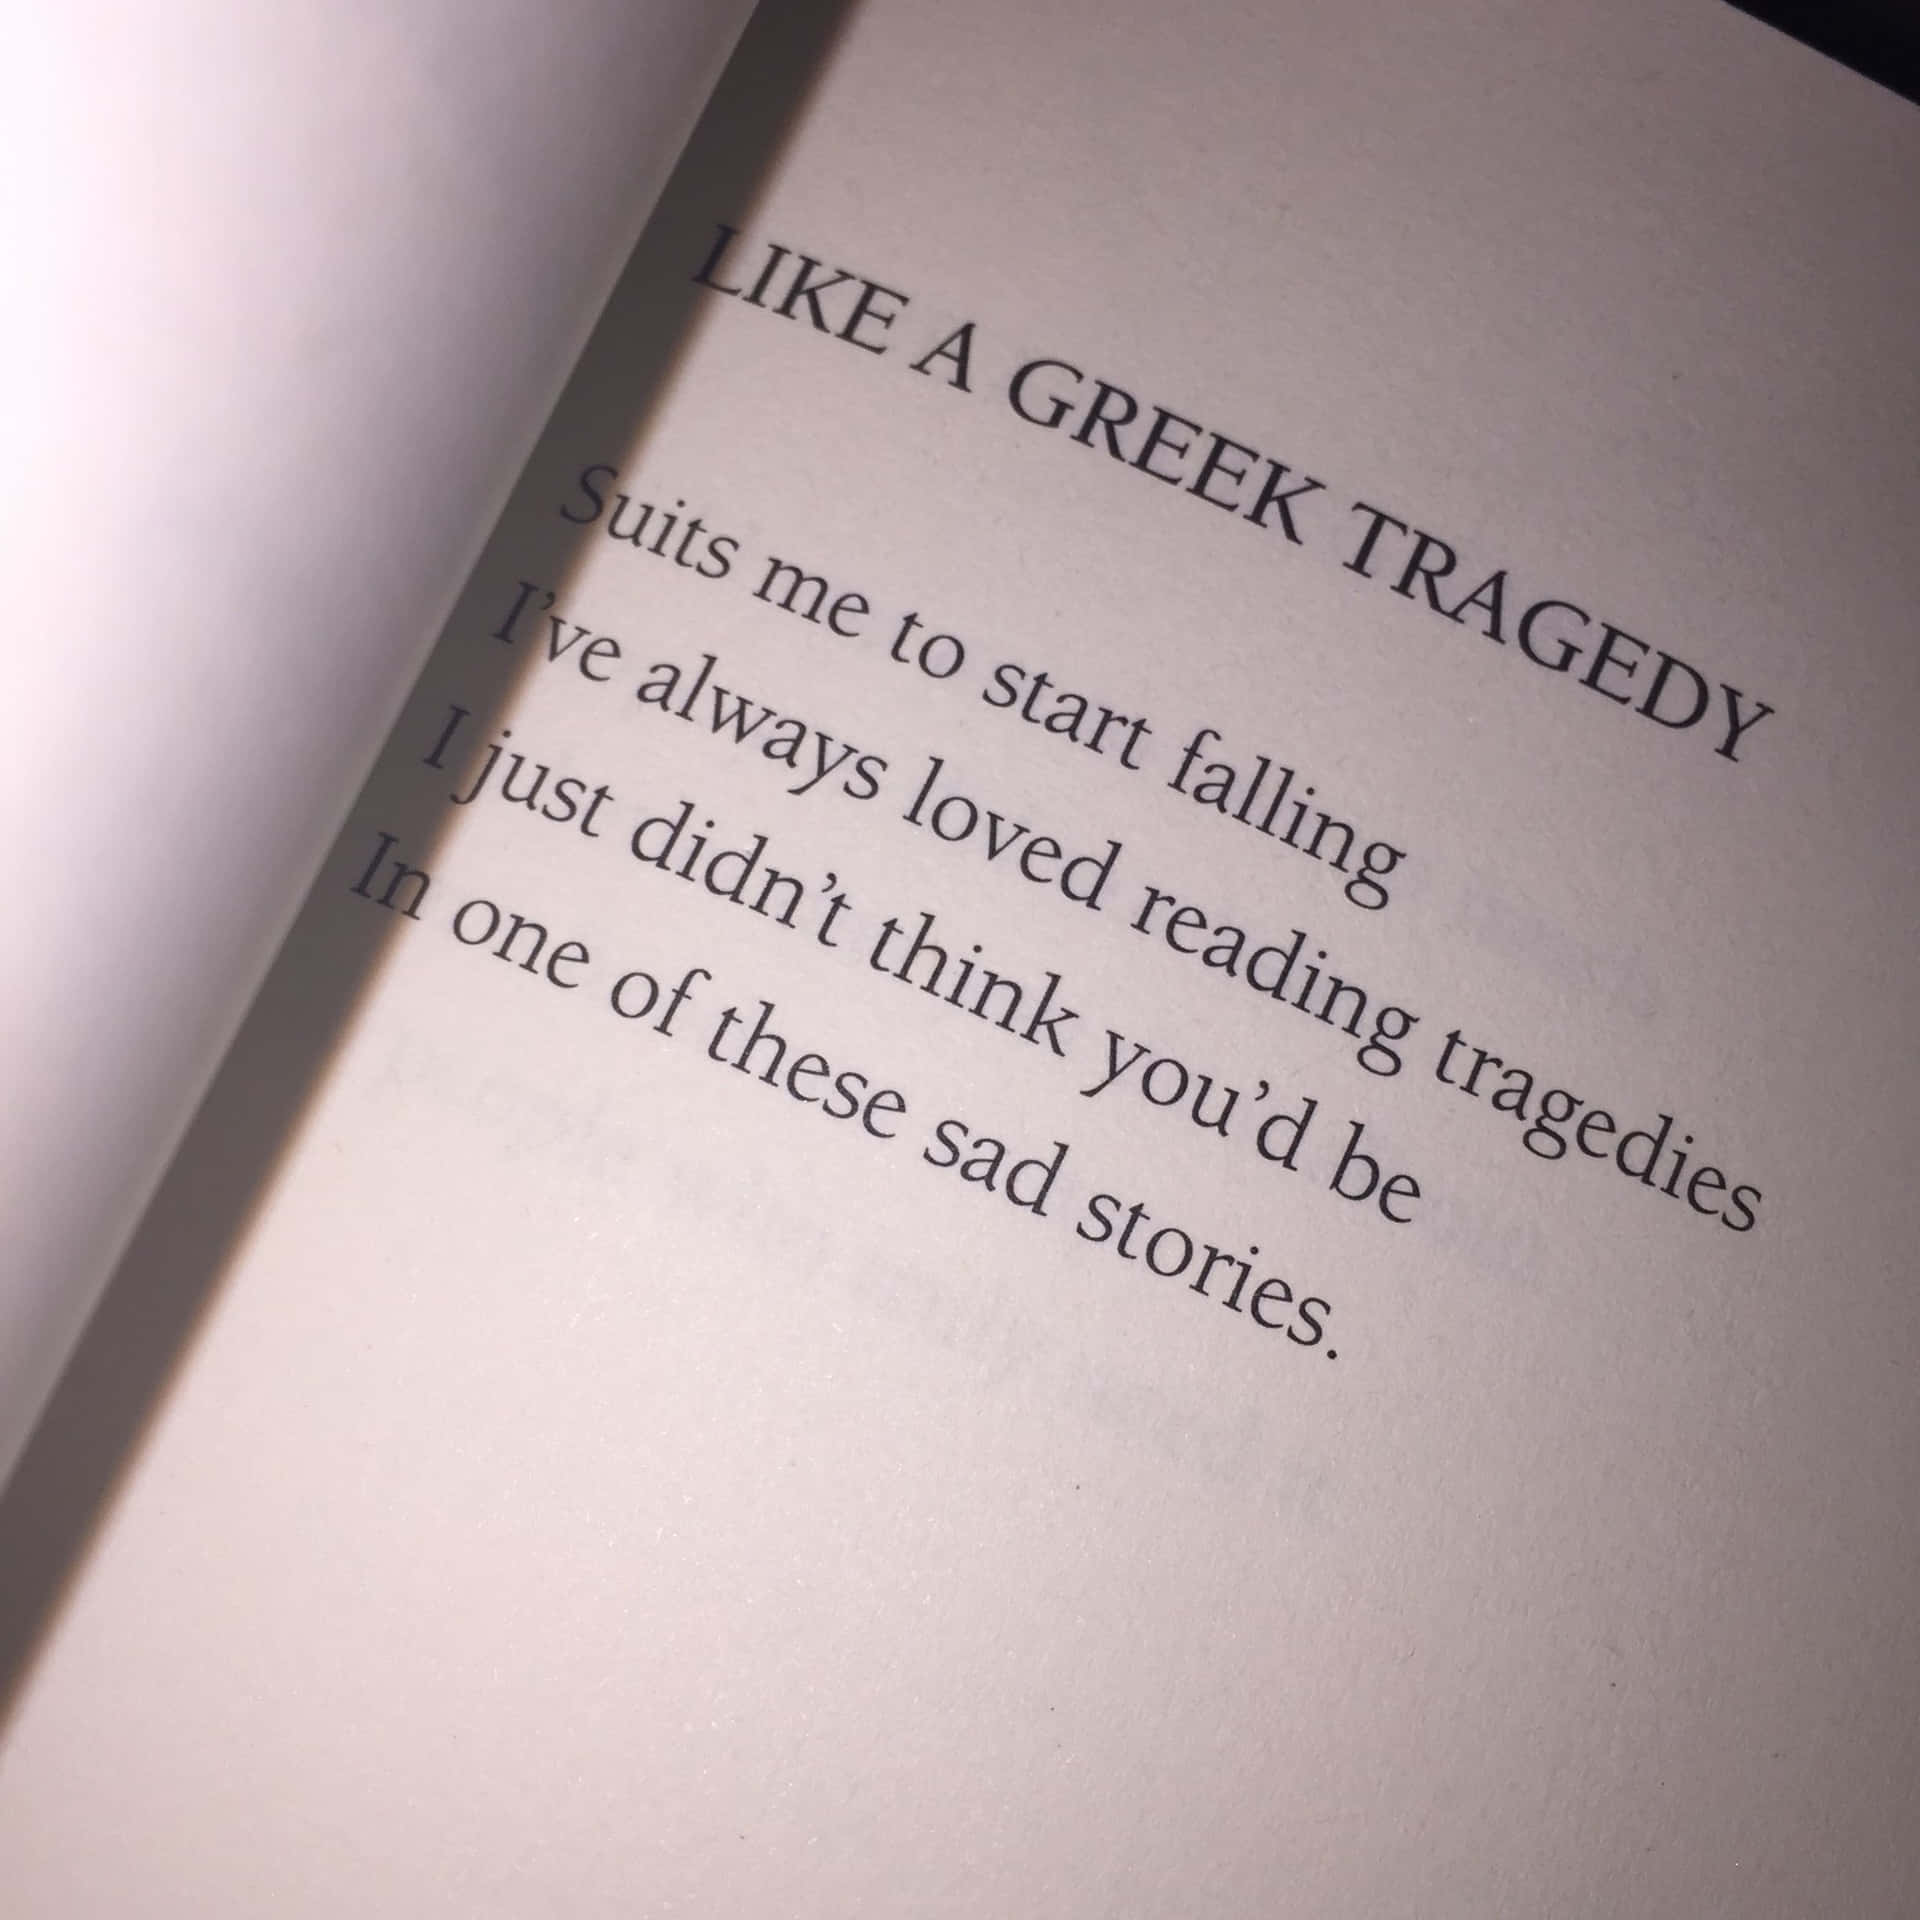 Greek Tragedy Book Quote Wallpaper